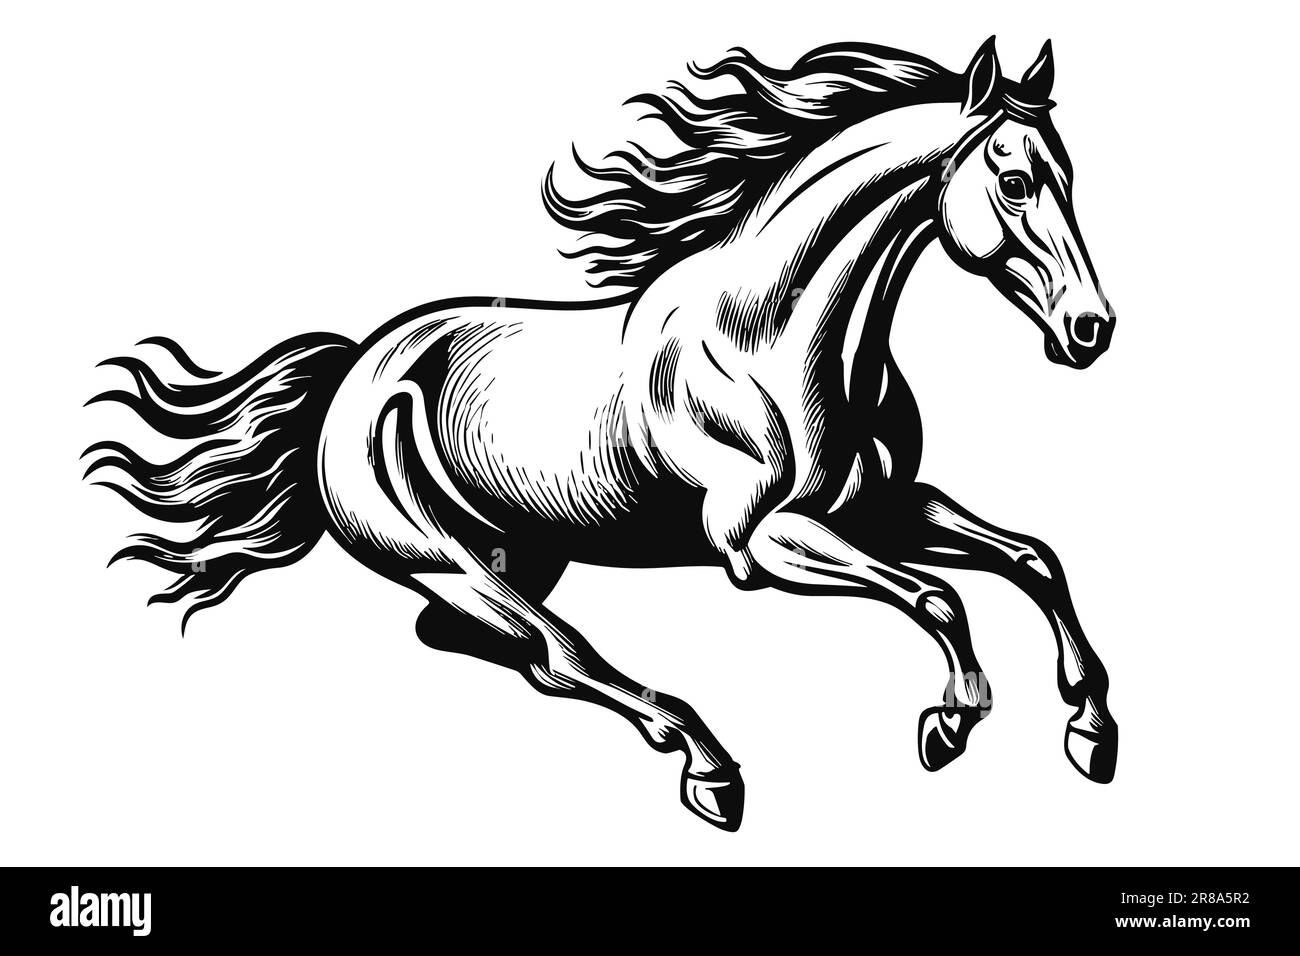 Clipart  White Horse  Easy horse drawing Horse art drawing Horse  drawings